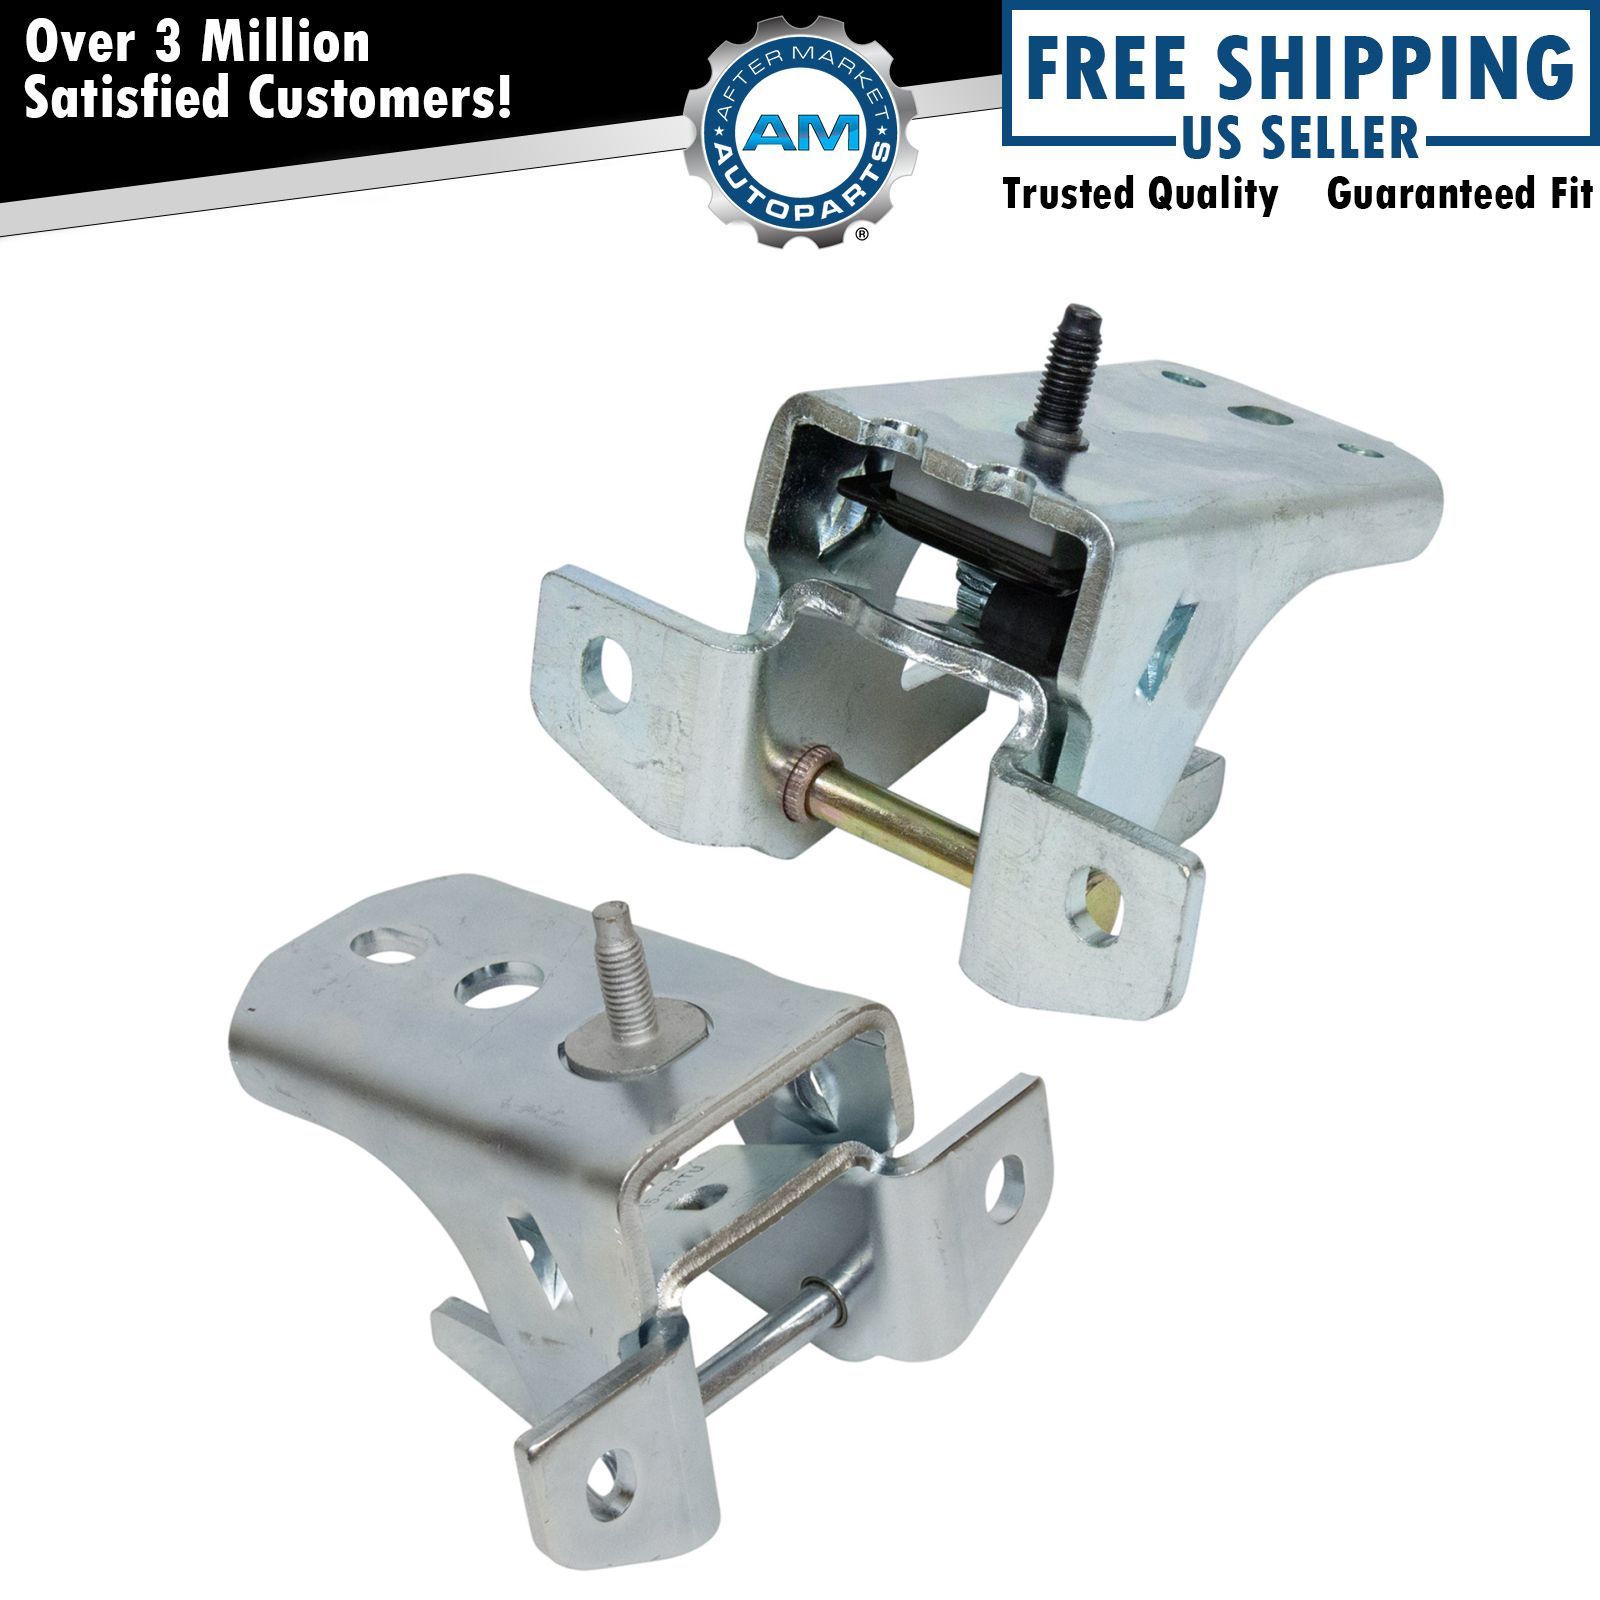 Front Upper & Lower Door Hinge LH or RH Pair Kit Set of 2 for Ford Mercury New